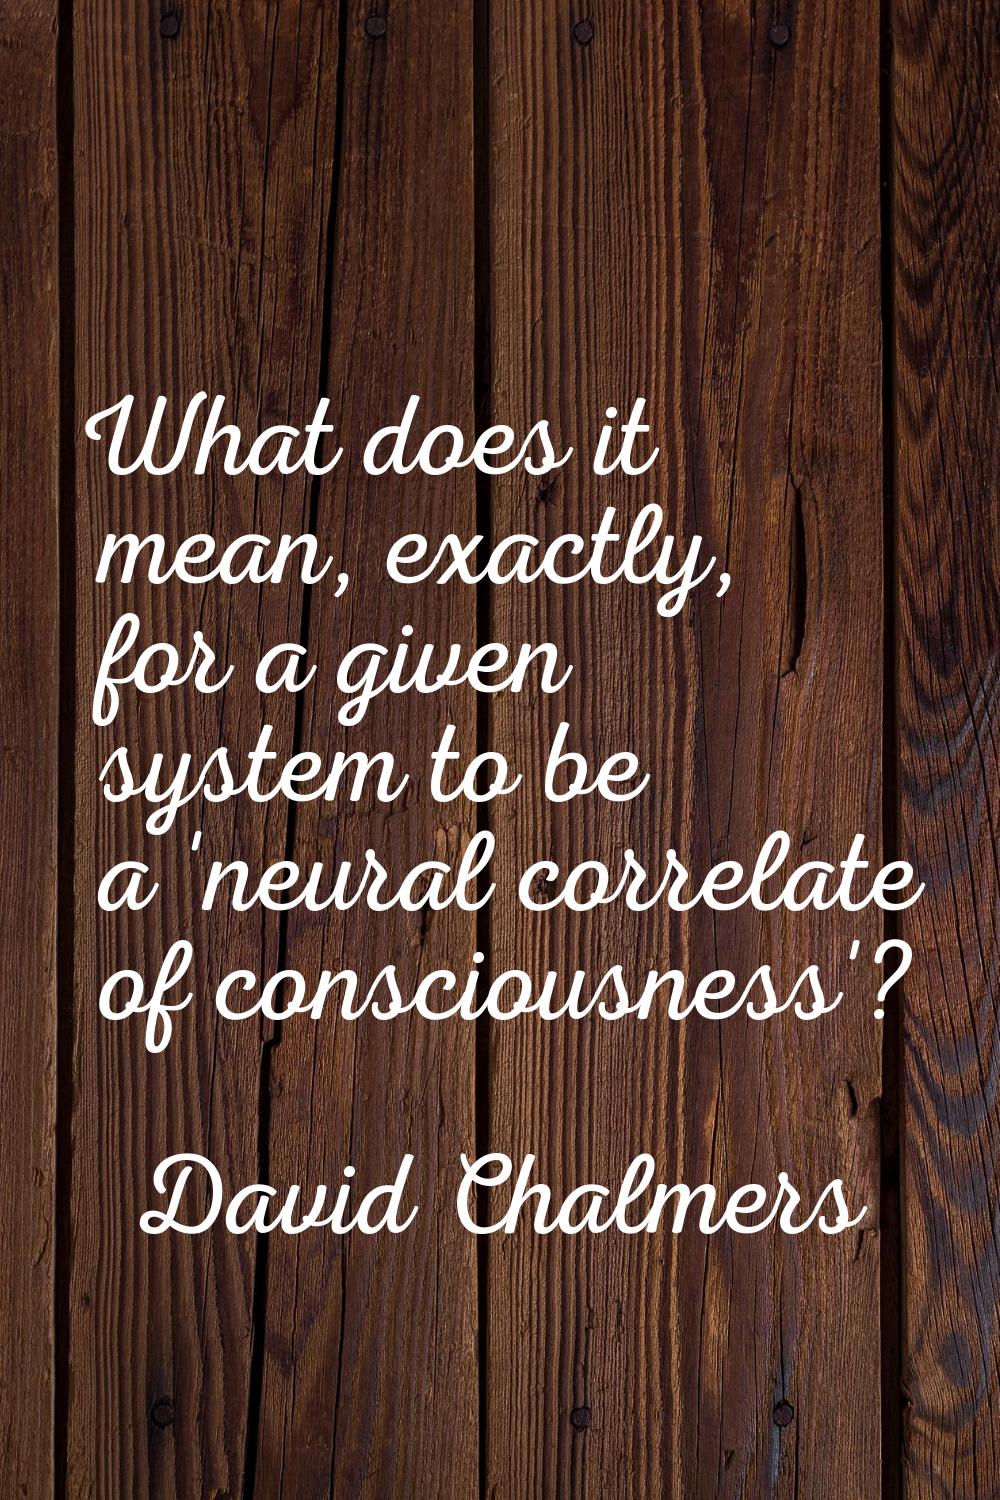 What does it mean, exactly, for a given system to be a 'neural correlate of consciousness'?